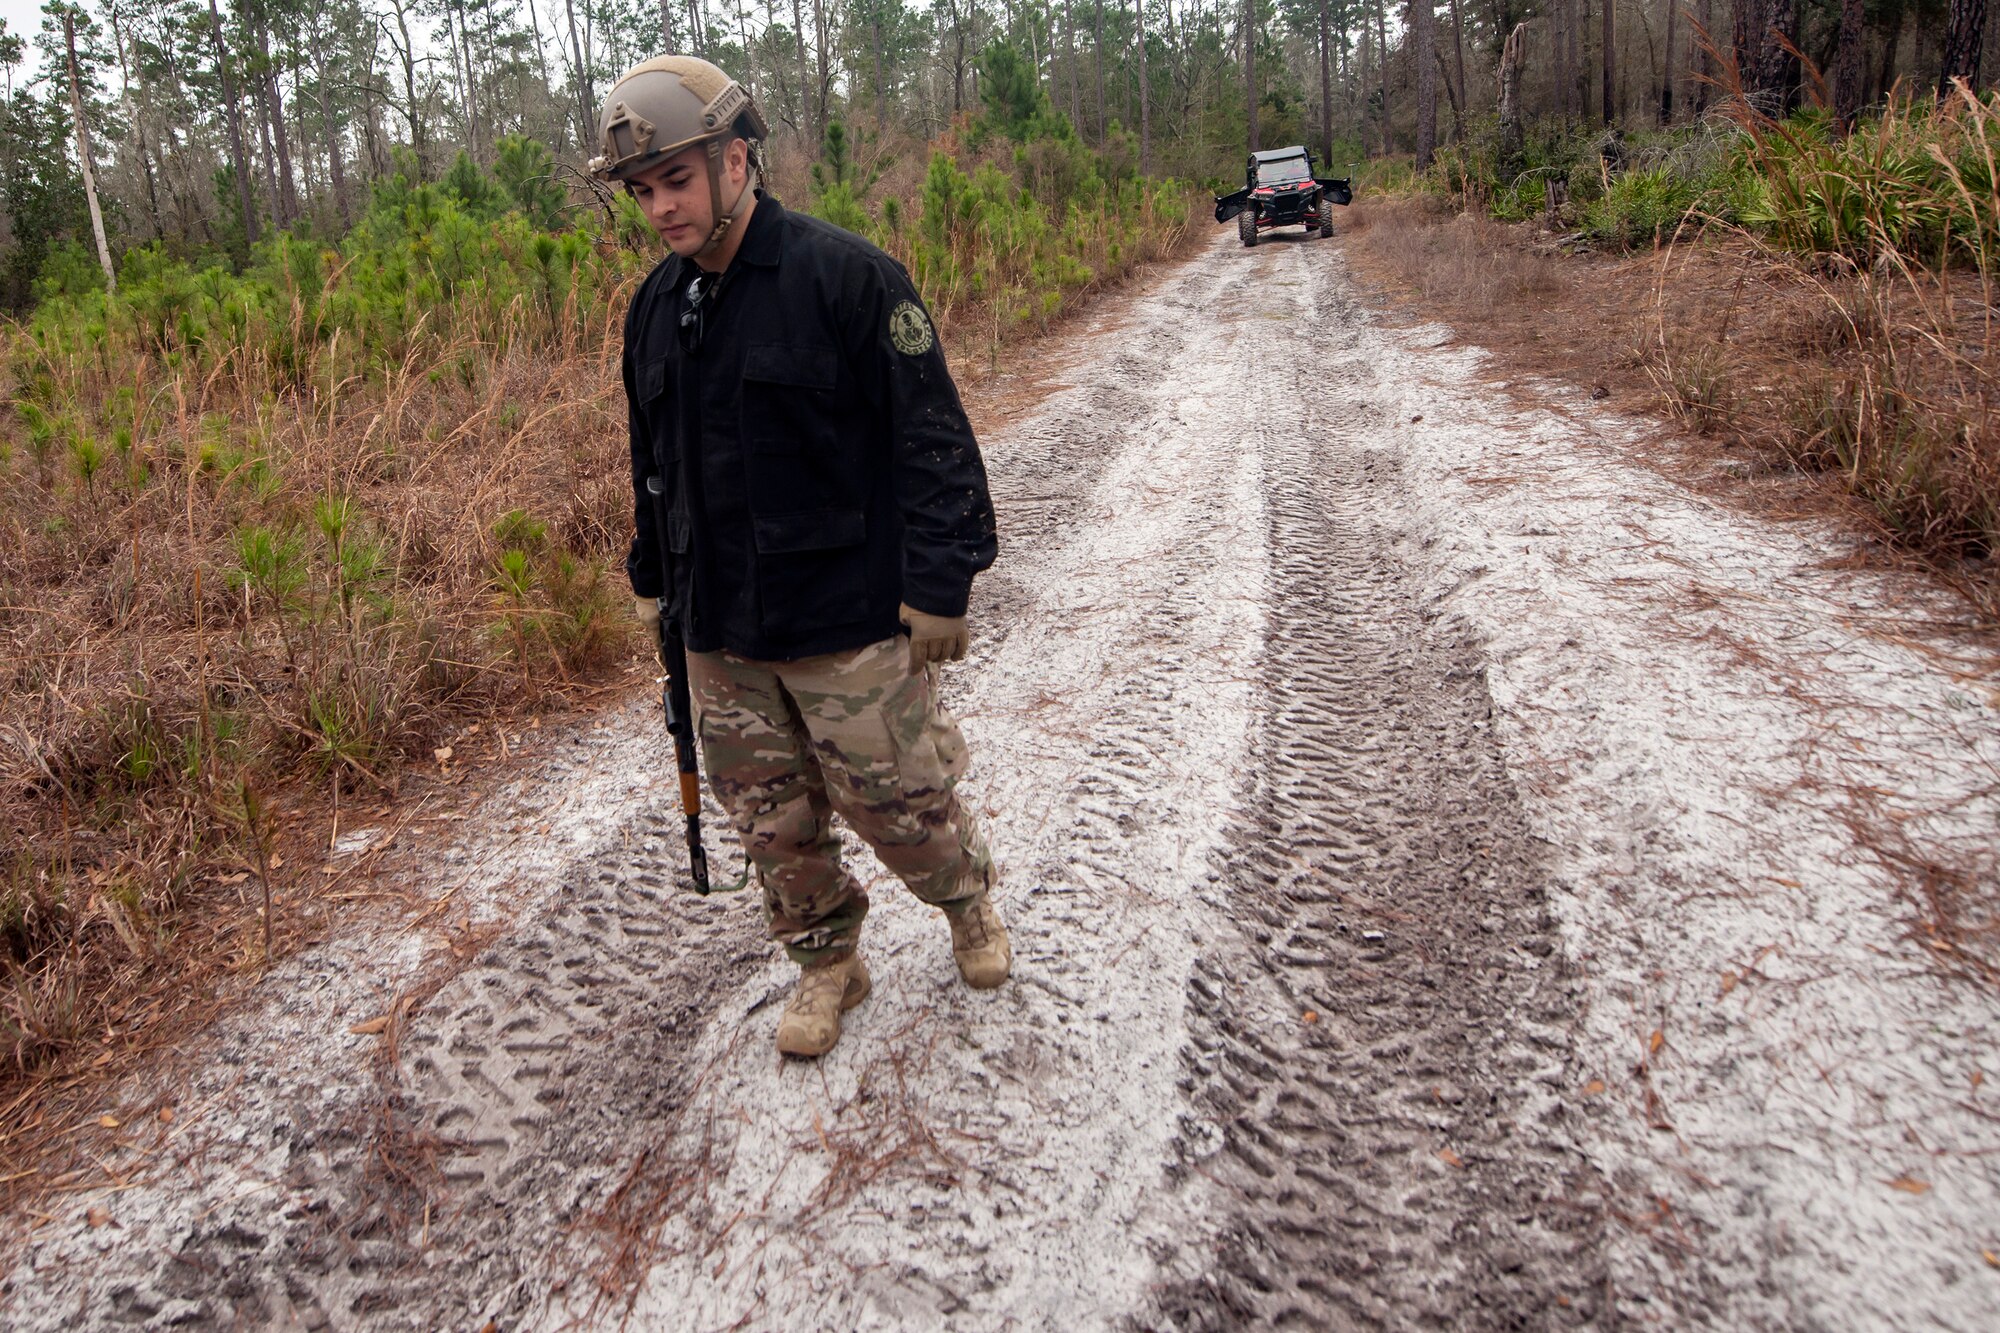 Staff Sgt. Michael Triana, 347th Operations Support Squadron independent duty mechanical technician, inspects the ground for footprints during combat survival training (CST), Feb. 13, 2018, at Moody Air Force base, Ga. CST prepares Airmen to avoid an enemy in the case that their aircraft were to crash in hostile territory.
(U.S. Air Force photo by Airman Eugene Oliver)